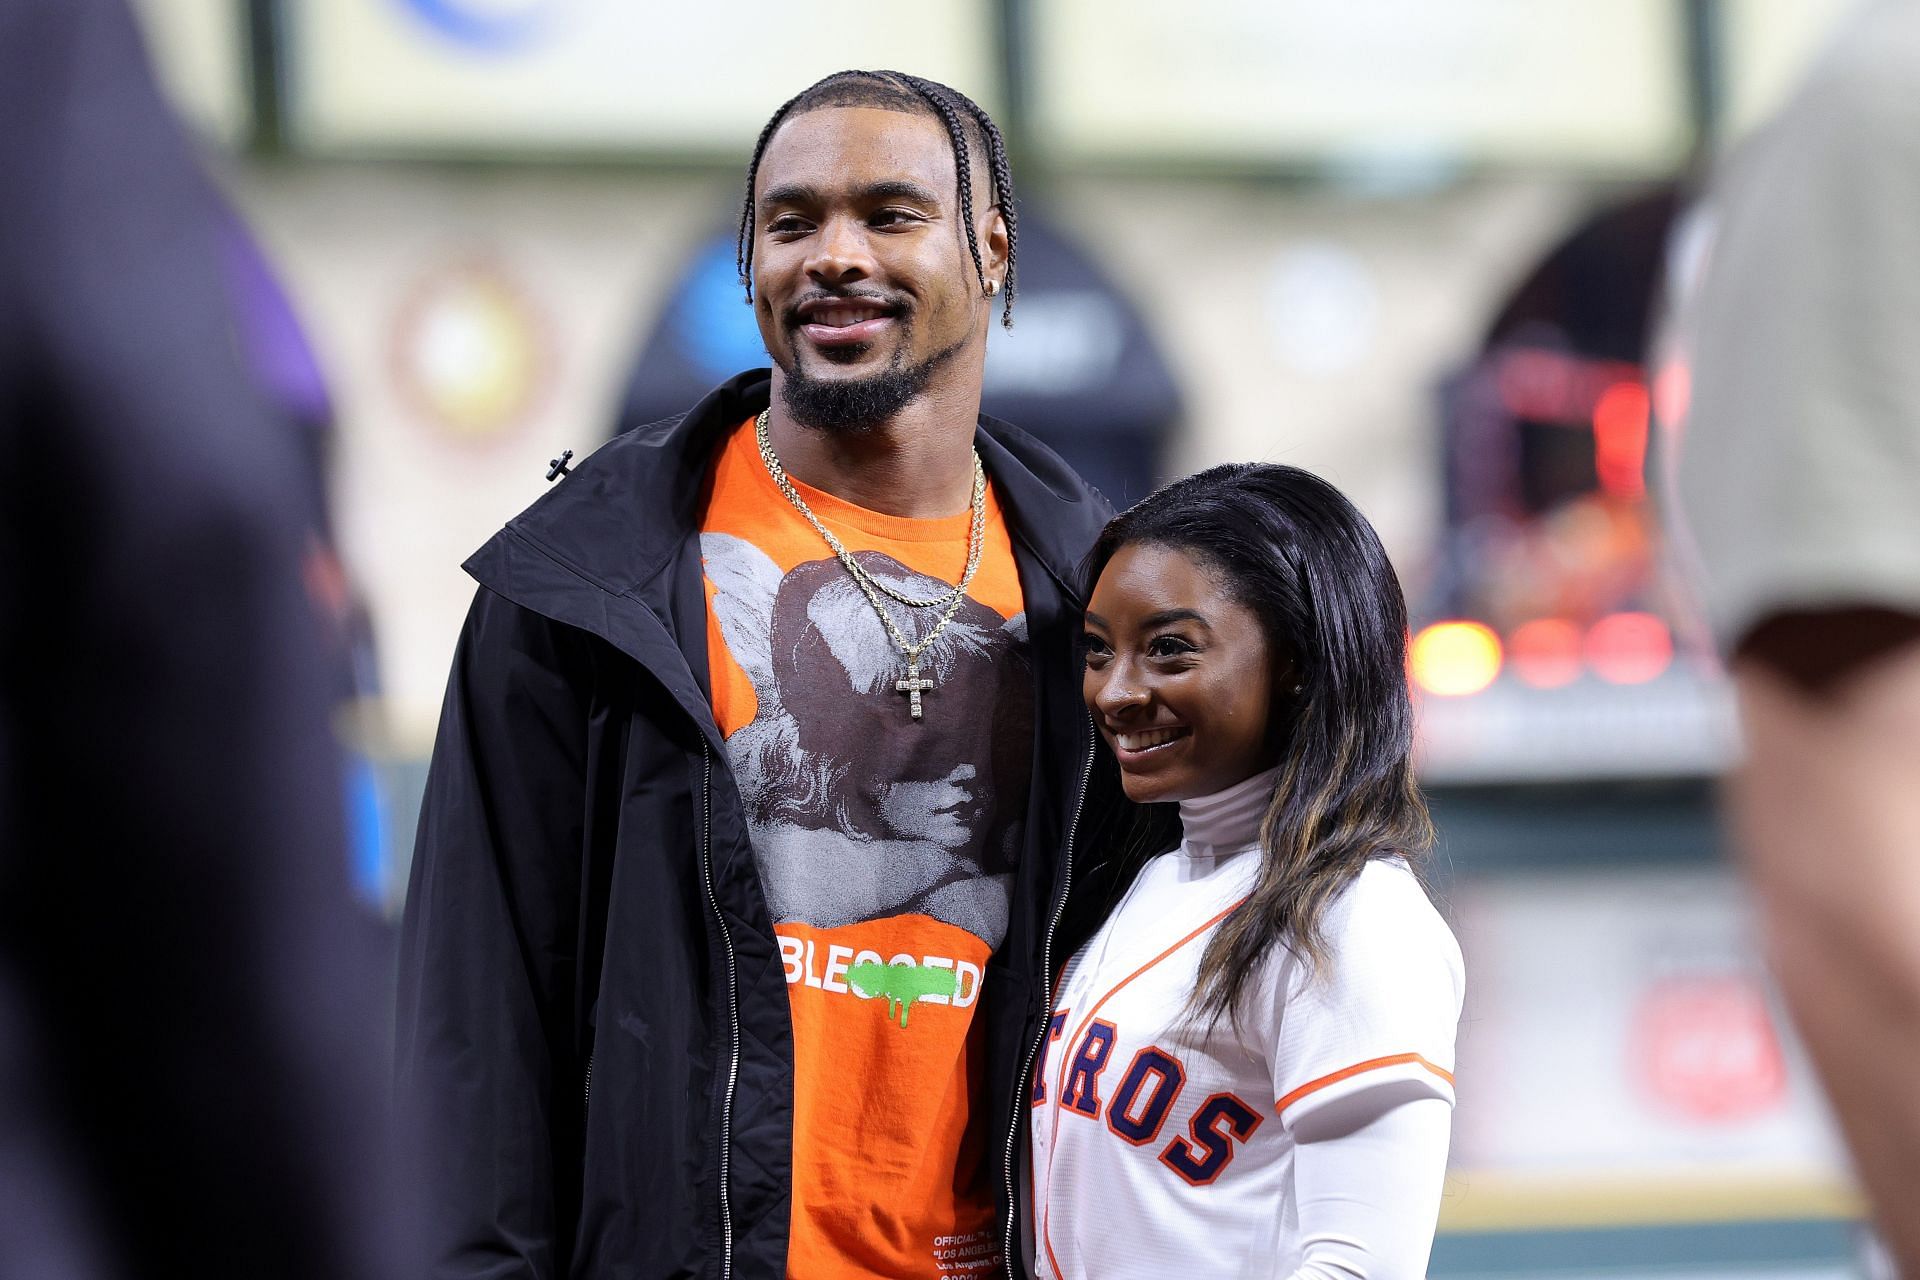 Simone Biles and Jonathan Owens at the the 2022 World Series. (Photo by Carmen Mandato/Getty Images)